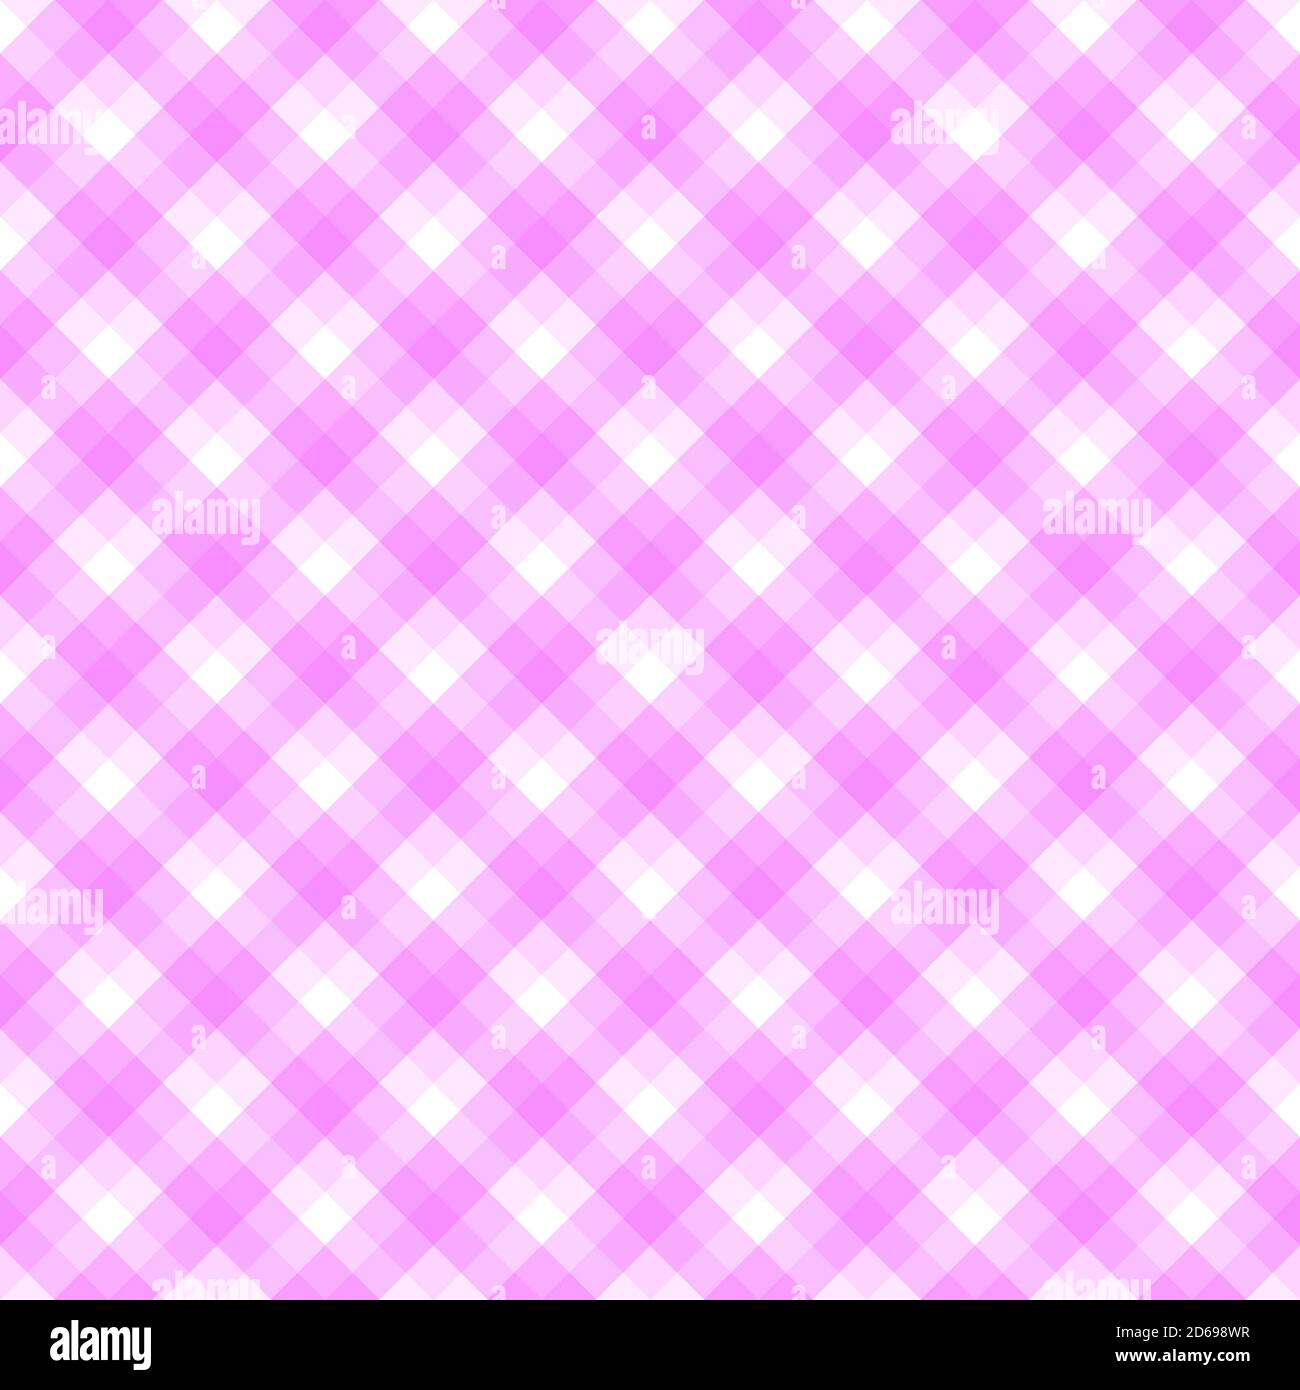 Checker pattern in hues of light fuchsia and white, seamless background Stock Photo